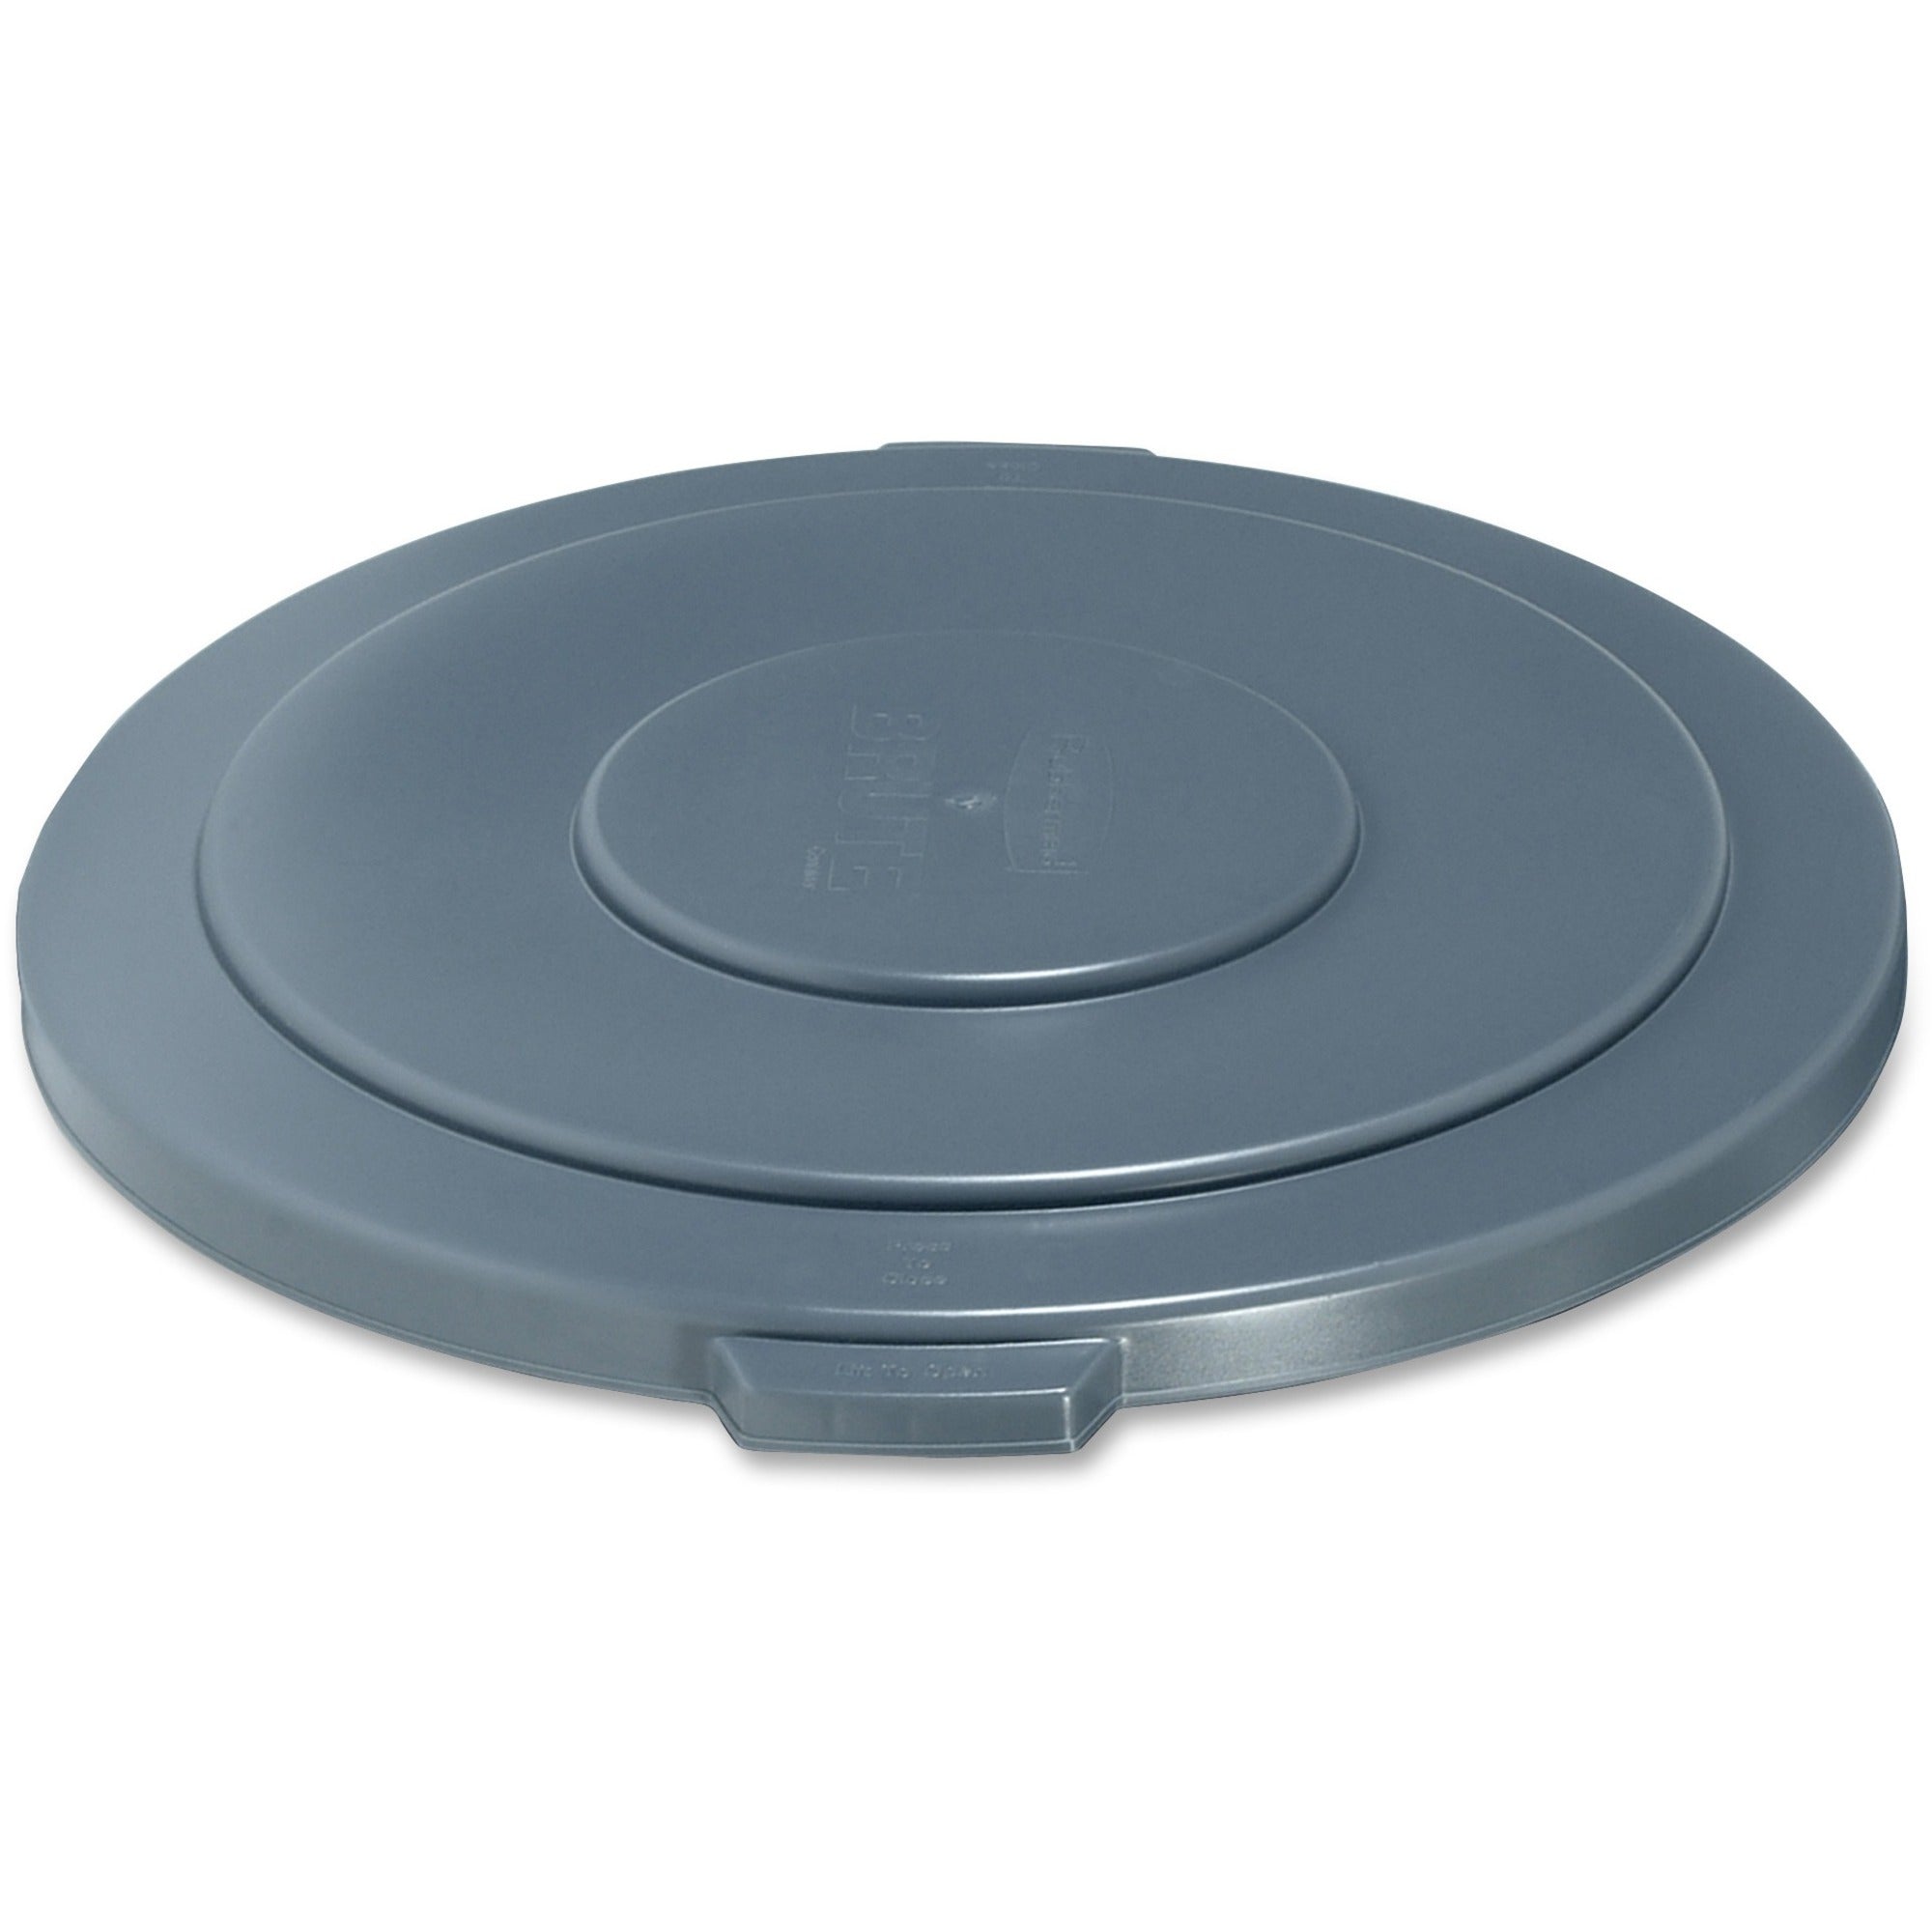 rubbermaid-commercial-brute-55-gallon-container-lid-round-plastic-3-carton-gray_rcp265400gyct - 1